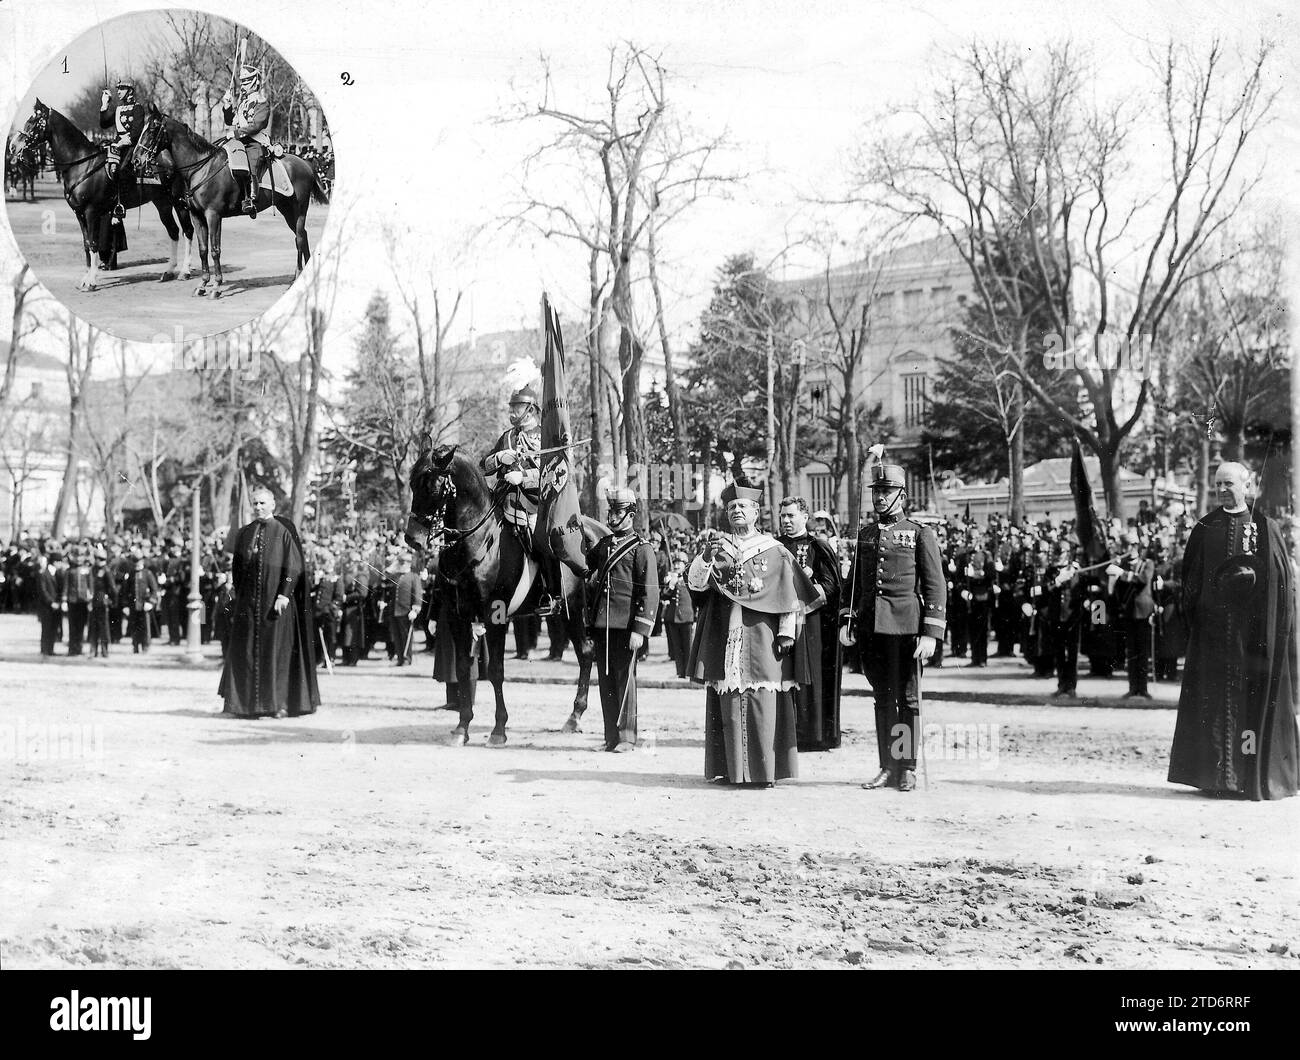 03/01/1908. Madrid. The swearing of the flag by the Recruits Verified yesterday in Castellana. (1) HM the King and Grand Duke Boris, at the Troops Parade; (2) the bishop of Sion (X) To his right, on horseback, General Bascaran, military governor of this court. Credit: Album / Archivo ABC / Francisco Goñi Stock Photo